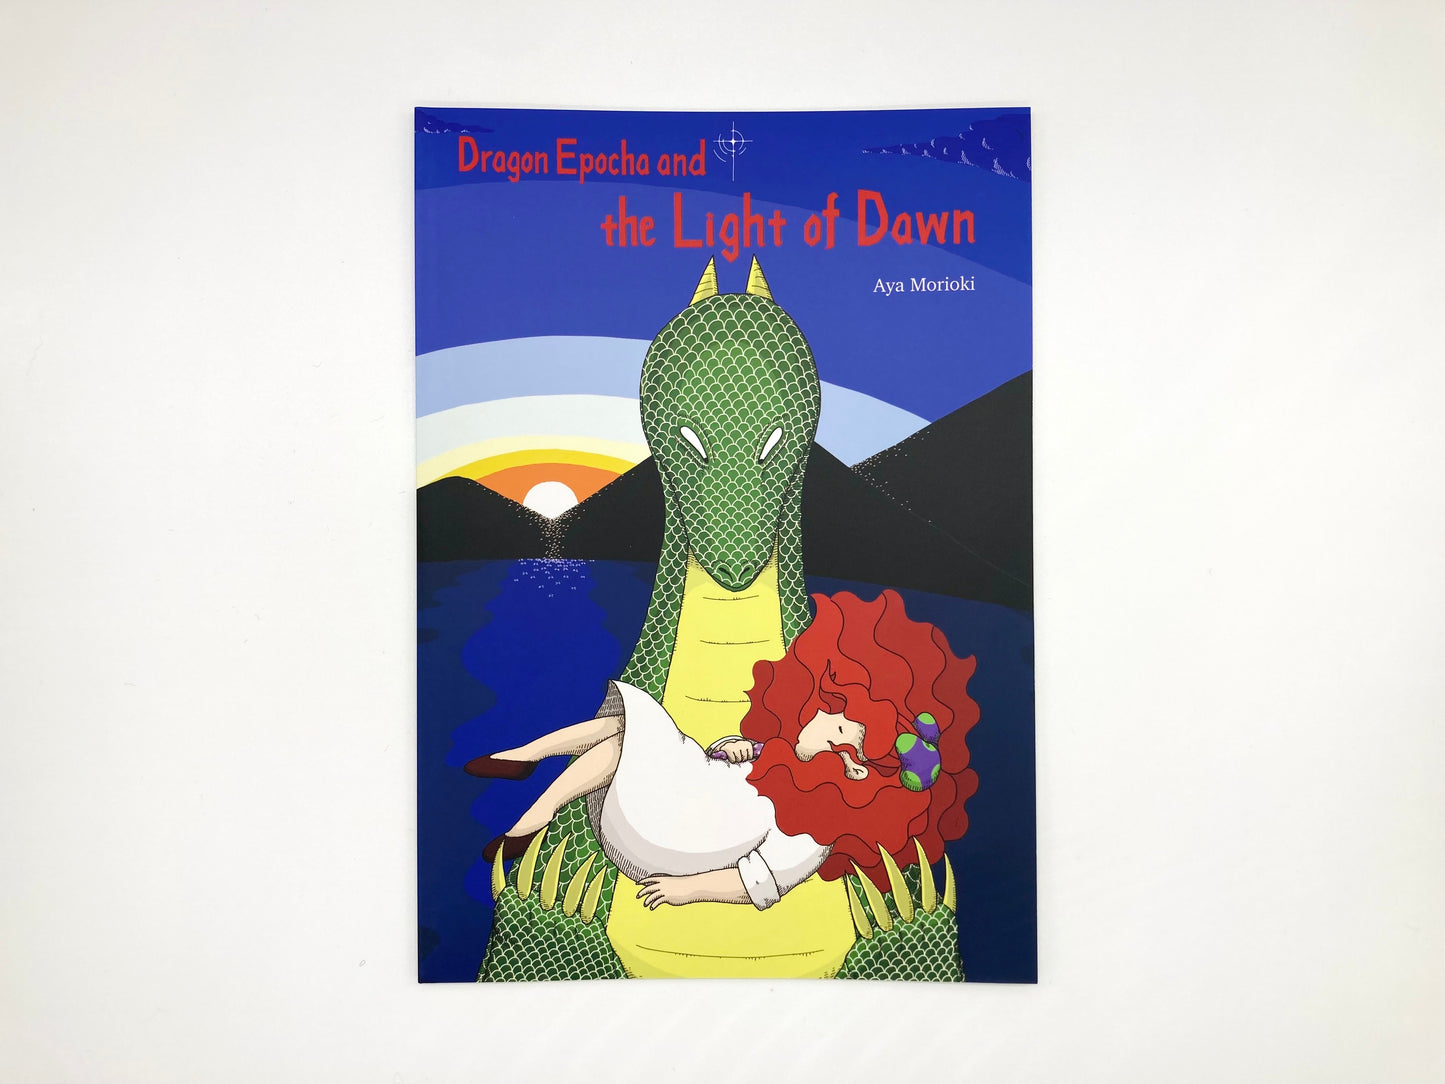 Picture book "Dragon Epocha and the Light of Dawn" (Series Ep.4)